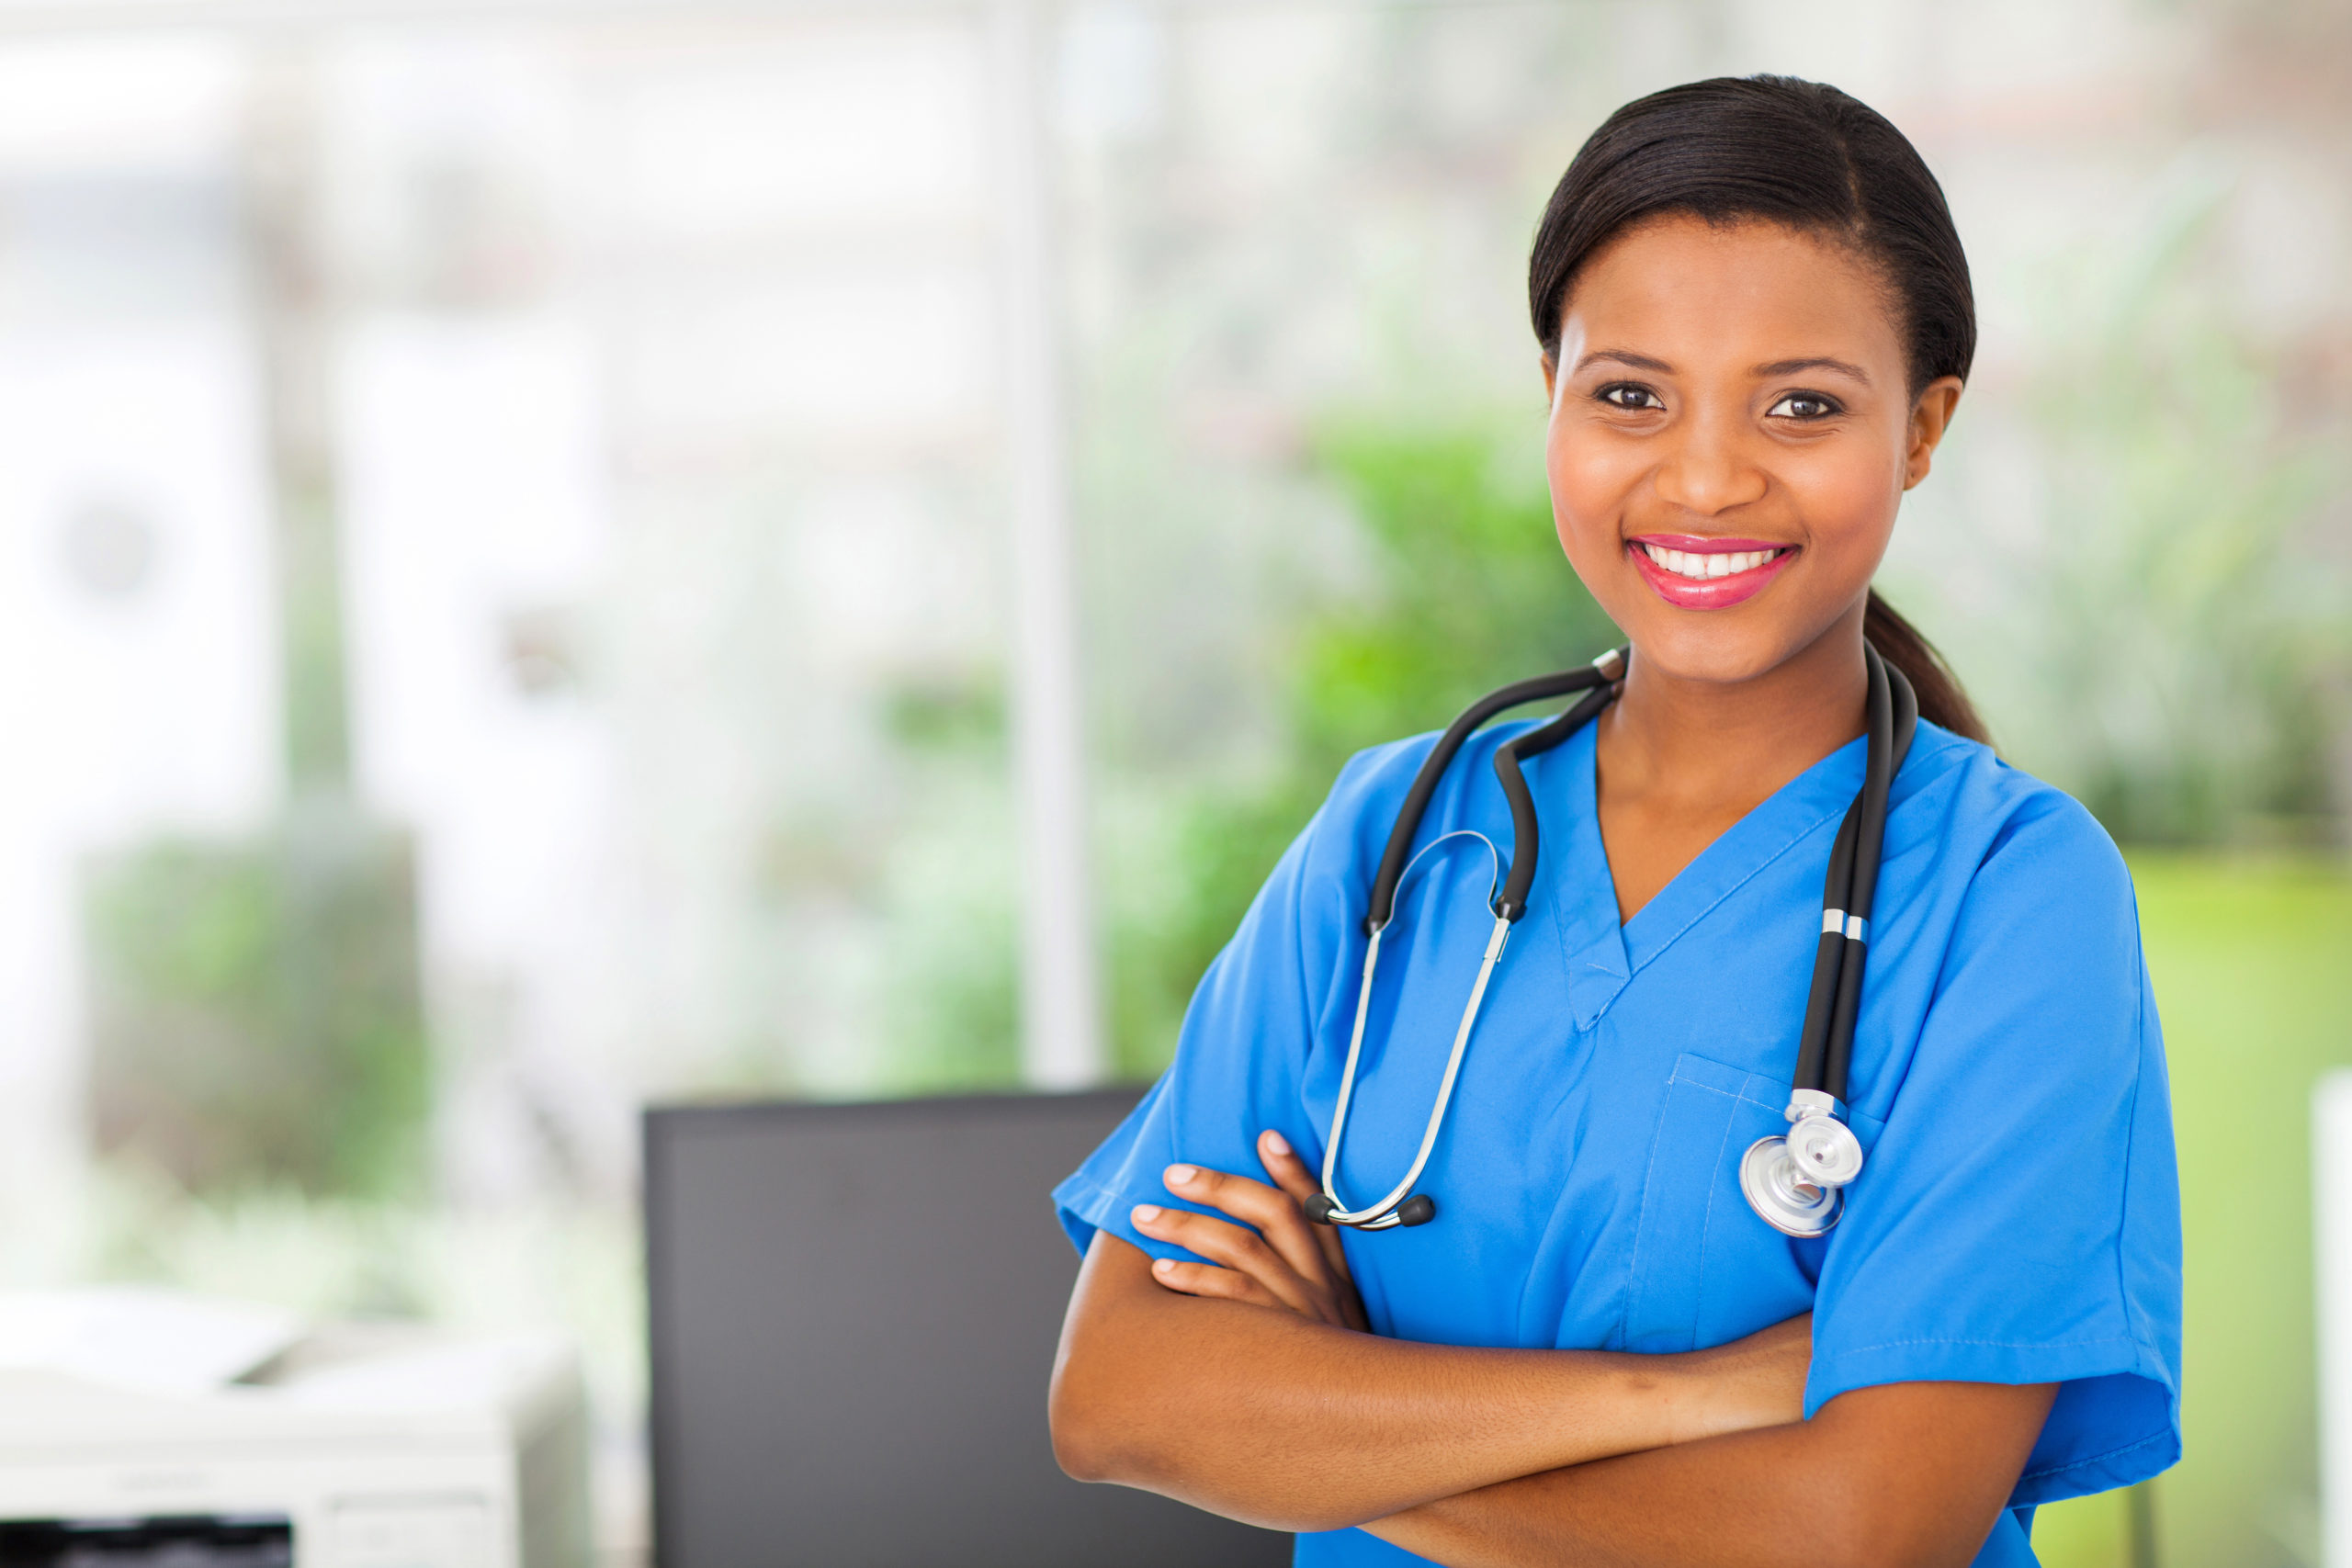 What are the requirements for becoming a pediatric nurse